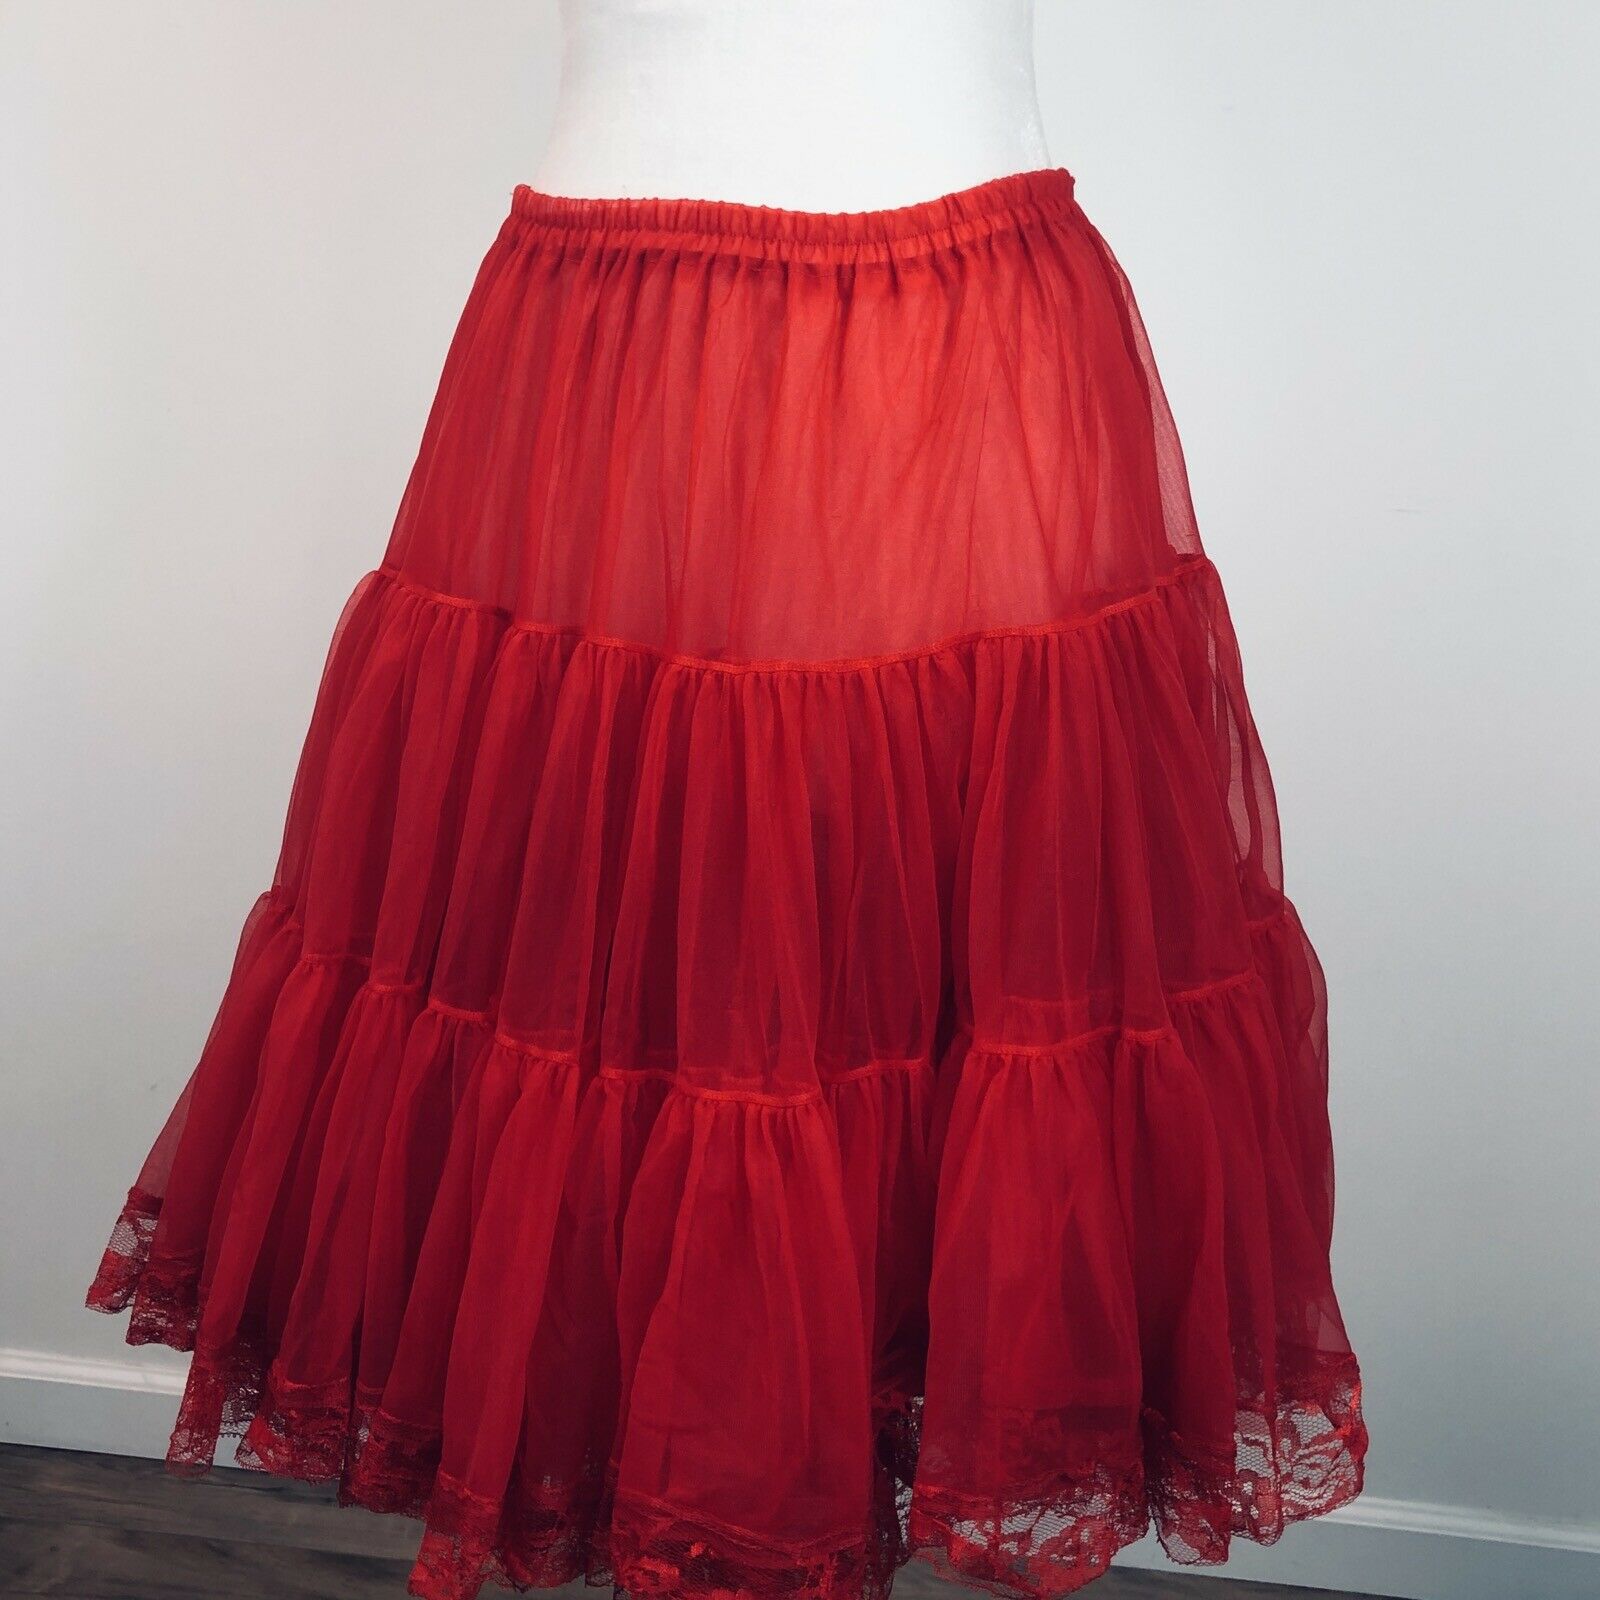 Square Dance Petticoat Red Softy Malco Modes #580 2 Layer Lace Hem 22”